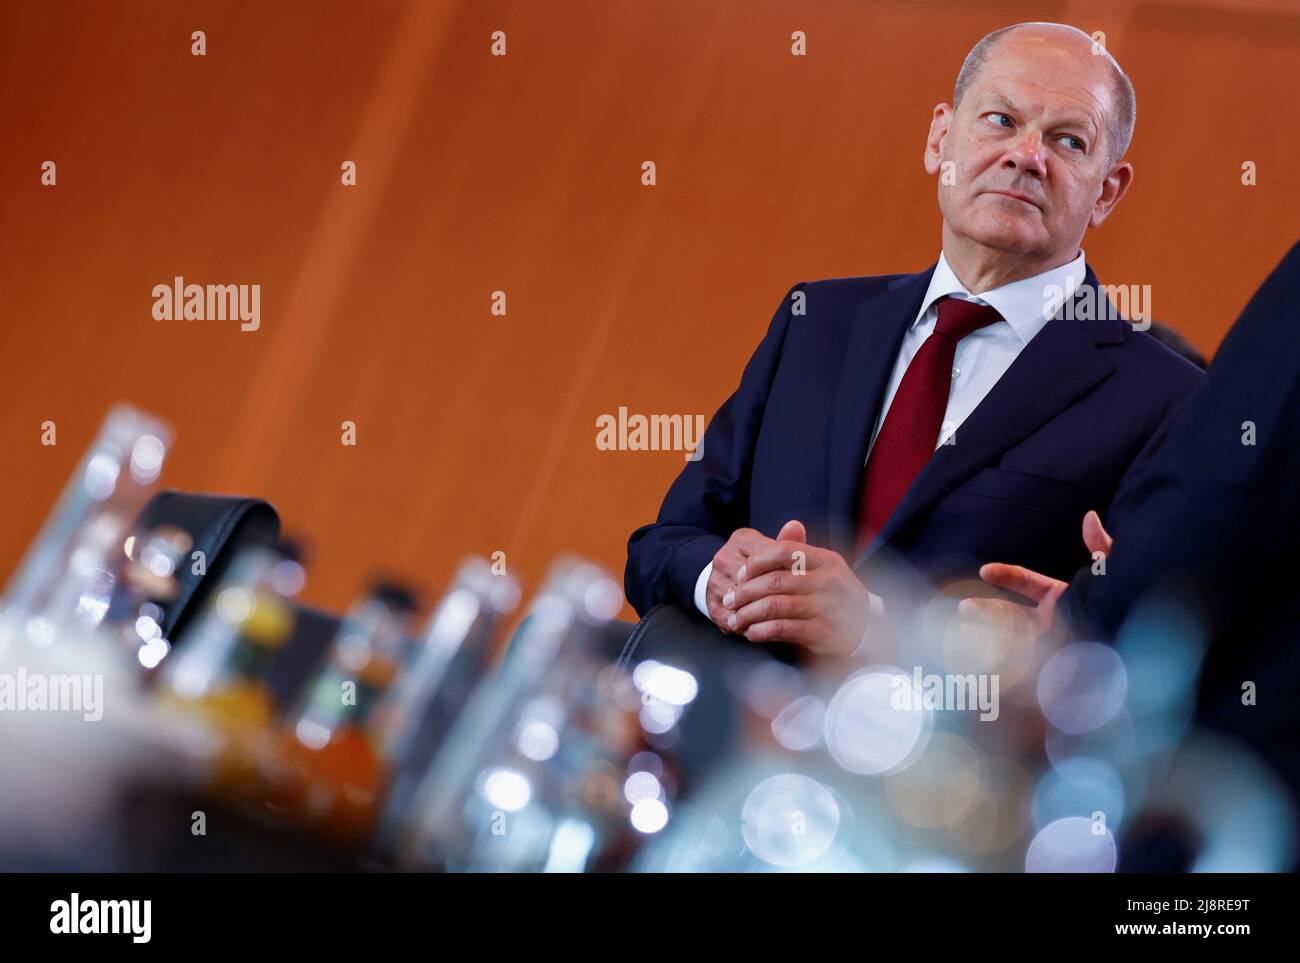 Germany's Chancellor Olaf Scholz attends the weekly cabinet meeting session in the German Federal Chancellery in Berlin, Germany May 18, 2022. REUTERS/Hannibal Hanschke Stock Photo